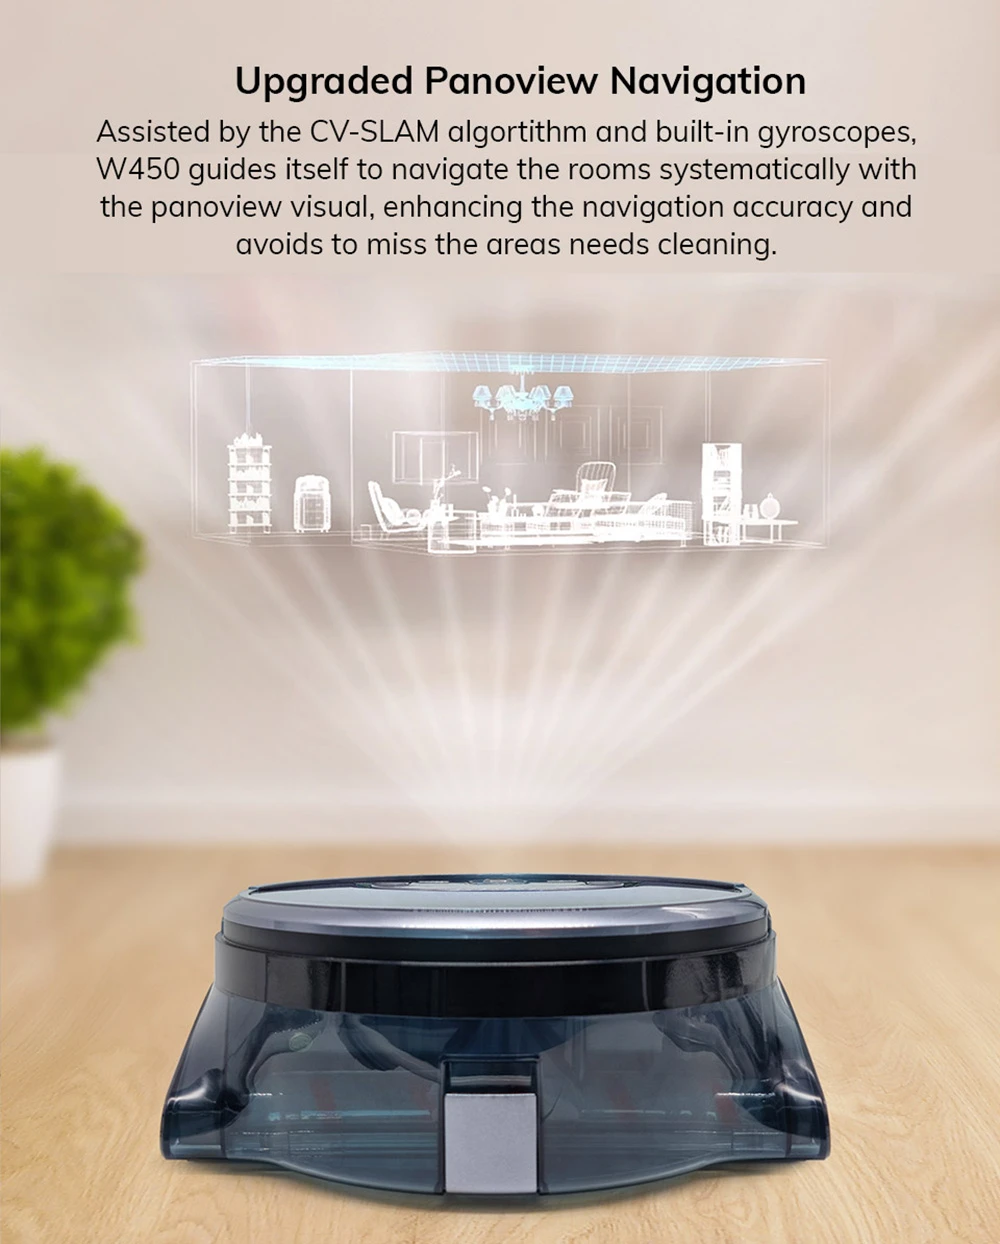 ZACO W450 Mopping Robot 850ml Freshwater Tank 3 Cleaning Mode 360° PanoView Camera Navigation App Control Voice Broadcast